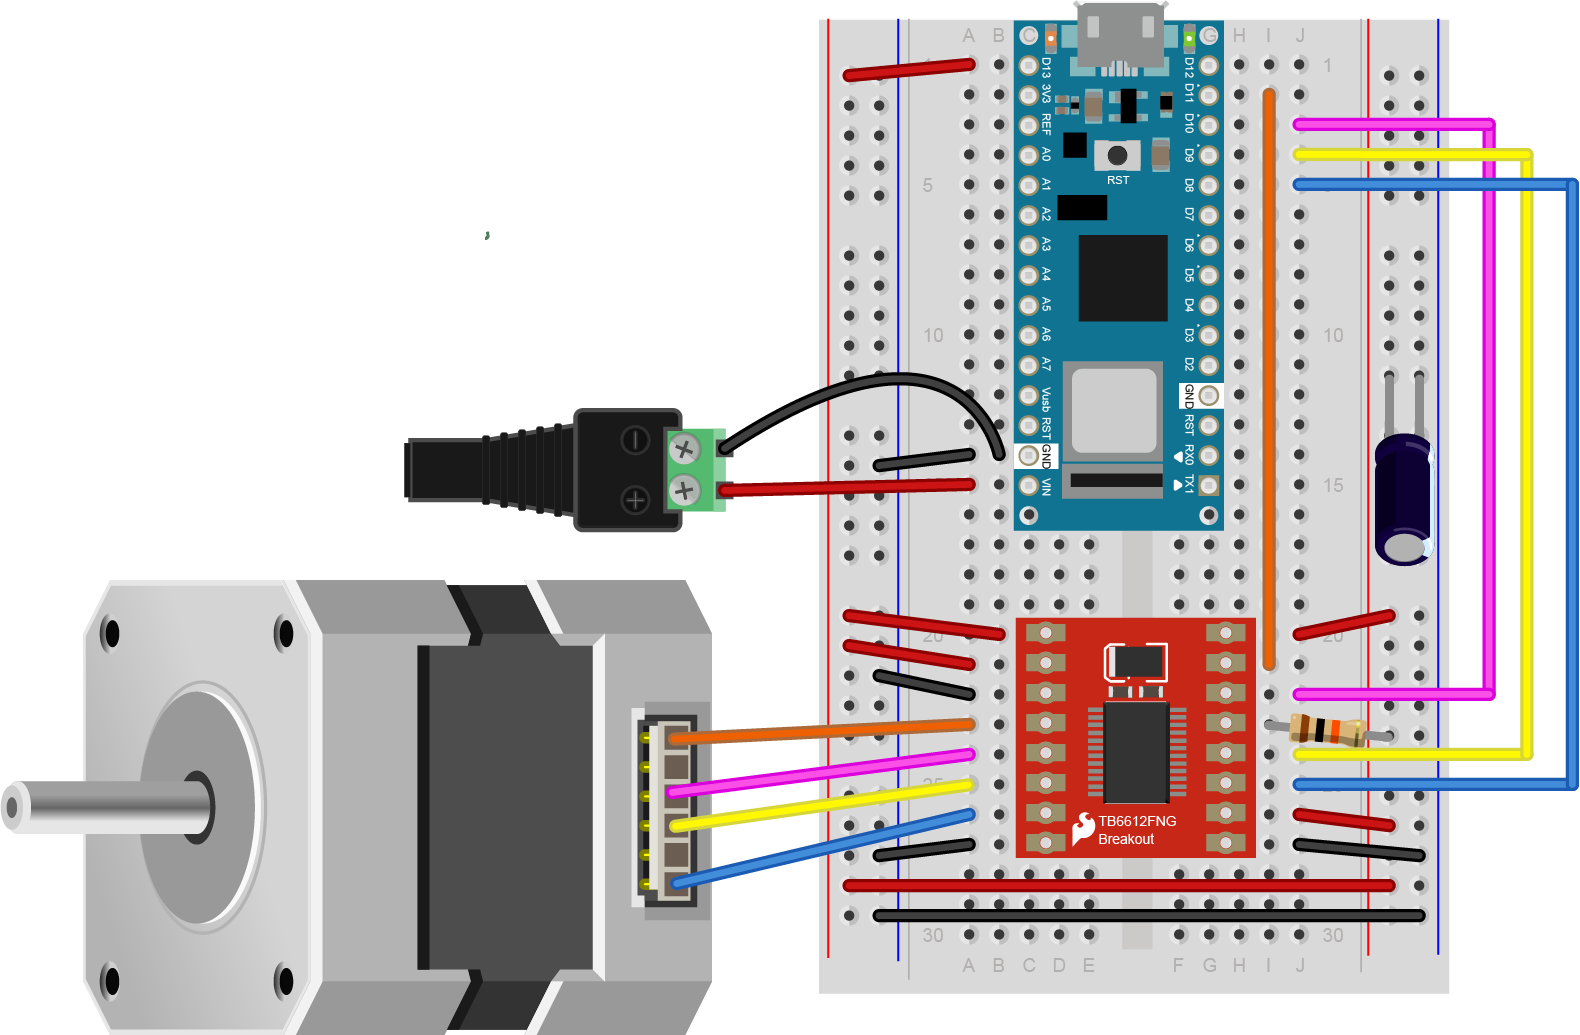 Figure 19. Breadboard view of an TB6612FNG running a 9V NEMA-style stepper motor from an Arduino Nano 33 IoT. The circuit is similar to Figure 17 above, but in this image an external power jack is connected to the Nano's Vin pin (pin 15) and grounded to its ground pin (pin 14). The TB6612FNG's VMOT pin (pin 1) is connected to the Nano 33 IoT's Vin pin (pin 15) and the positive terminal of the power jack. The Nano would then need to be powered by a 9V DC power supply connected to the power jack